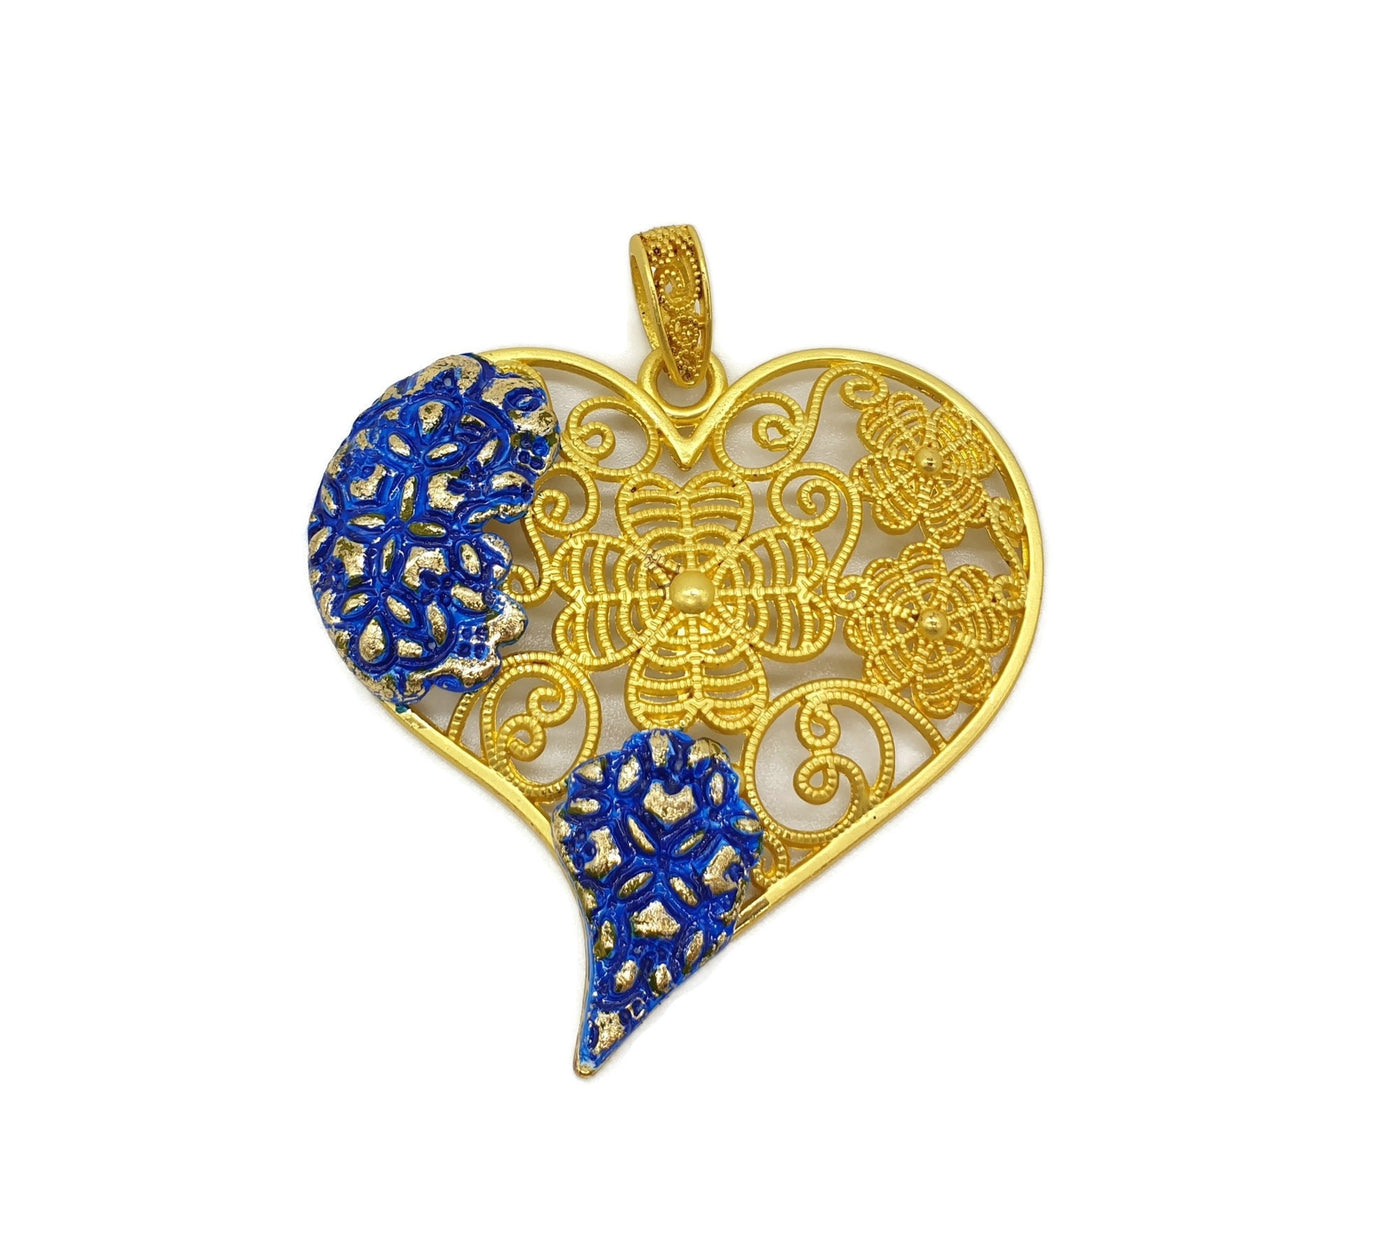 CLARICE - Gold Heart Tile Necklace